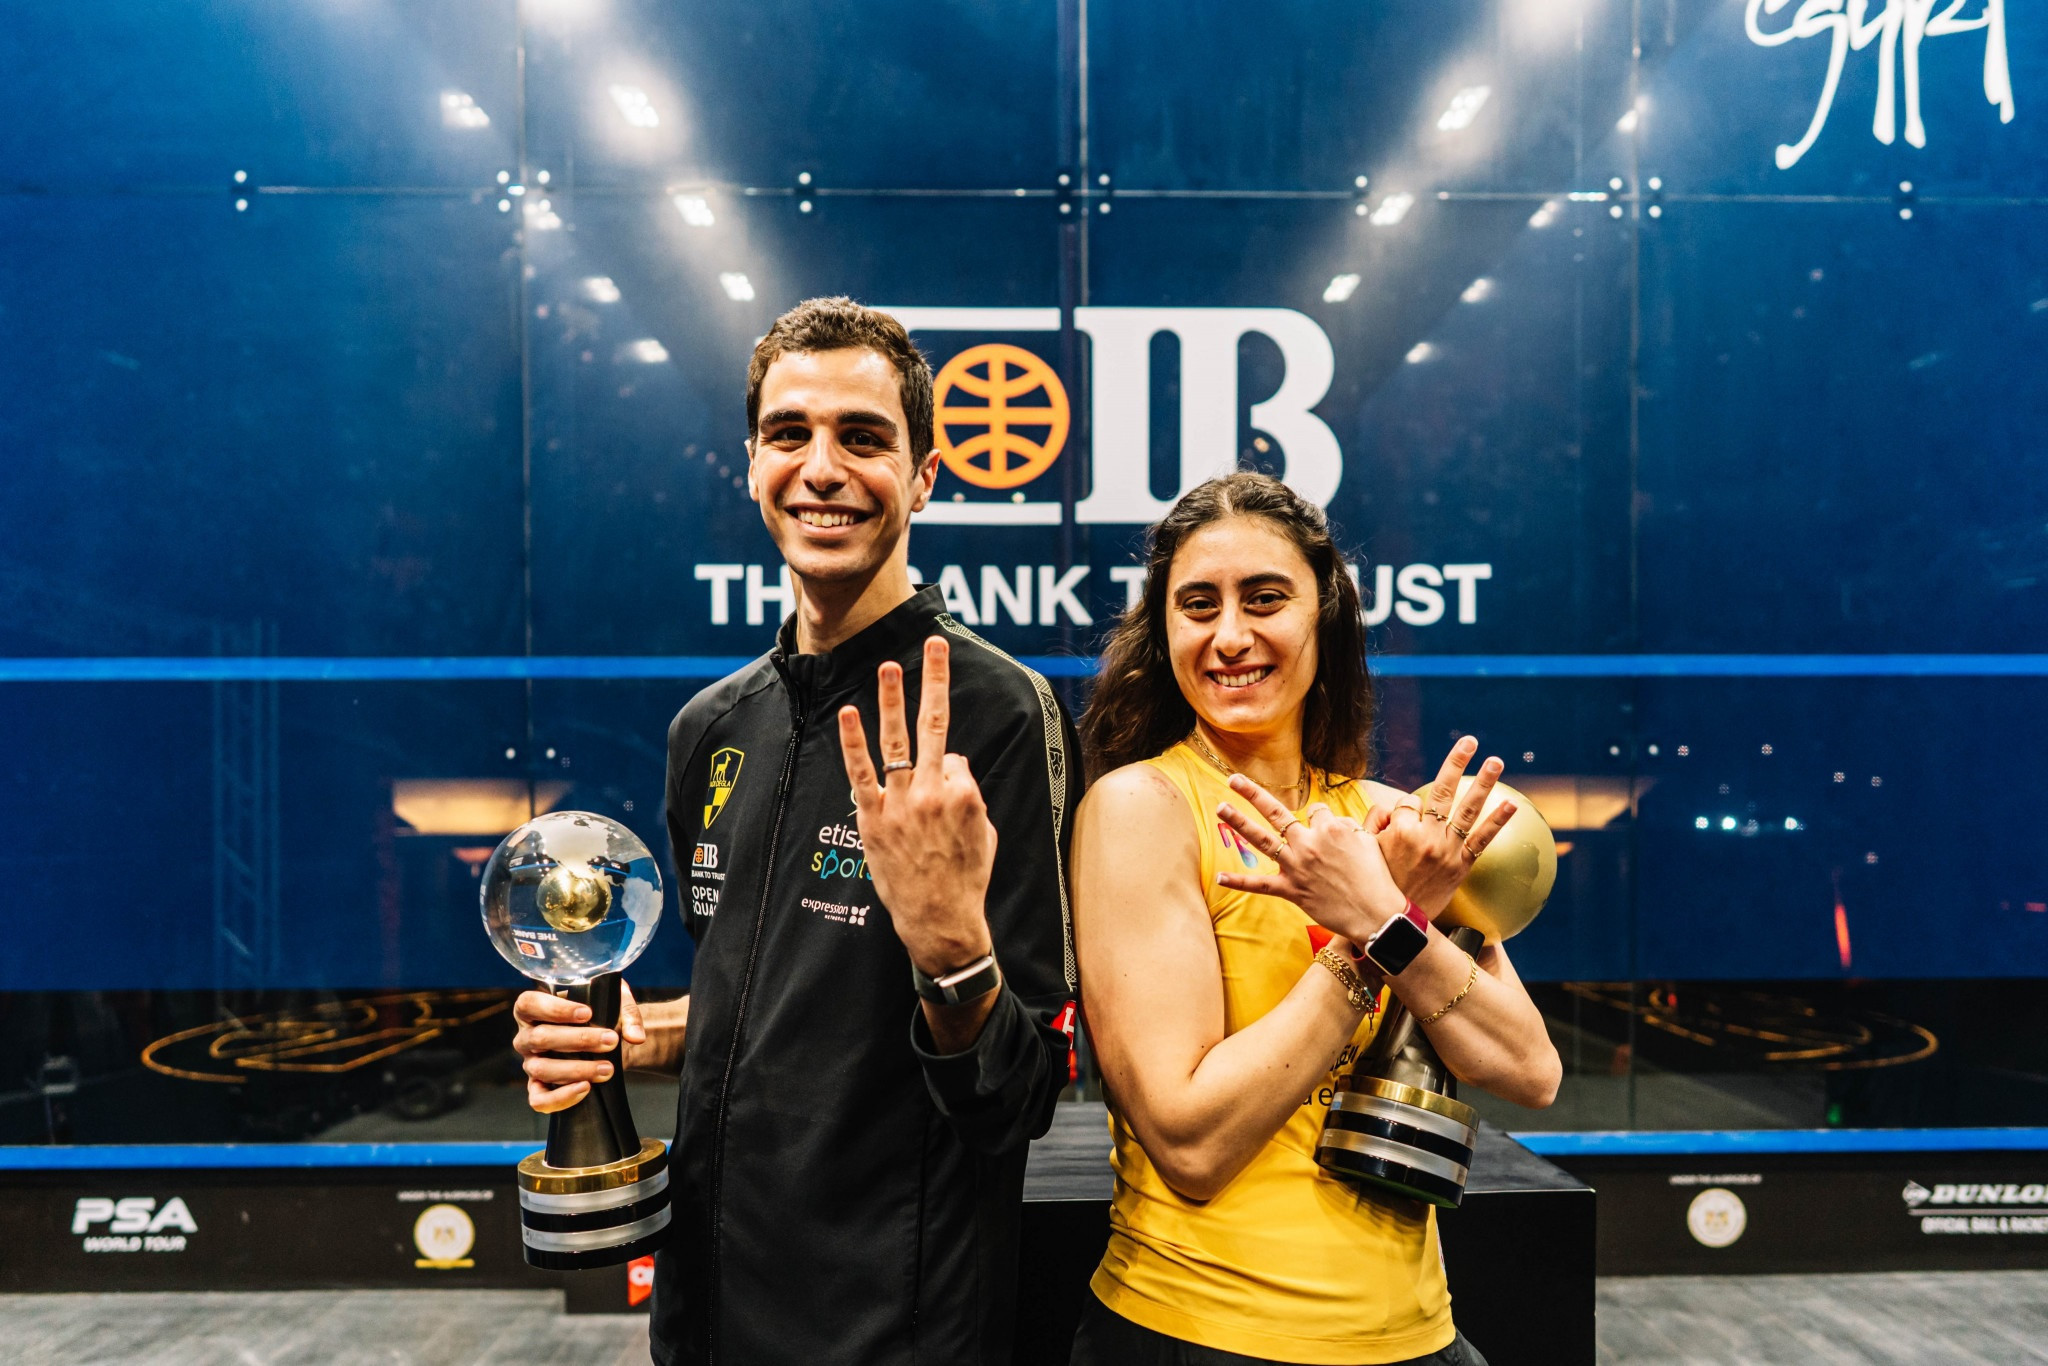 Ali Farag, left, and Nour El Sherbini, right, have won three and six titles respectively ©PSA World Tour